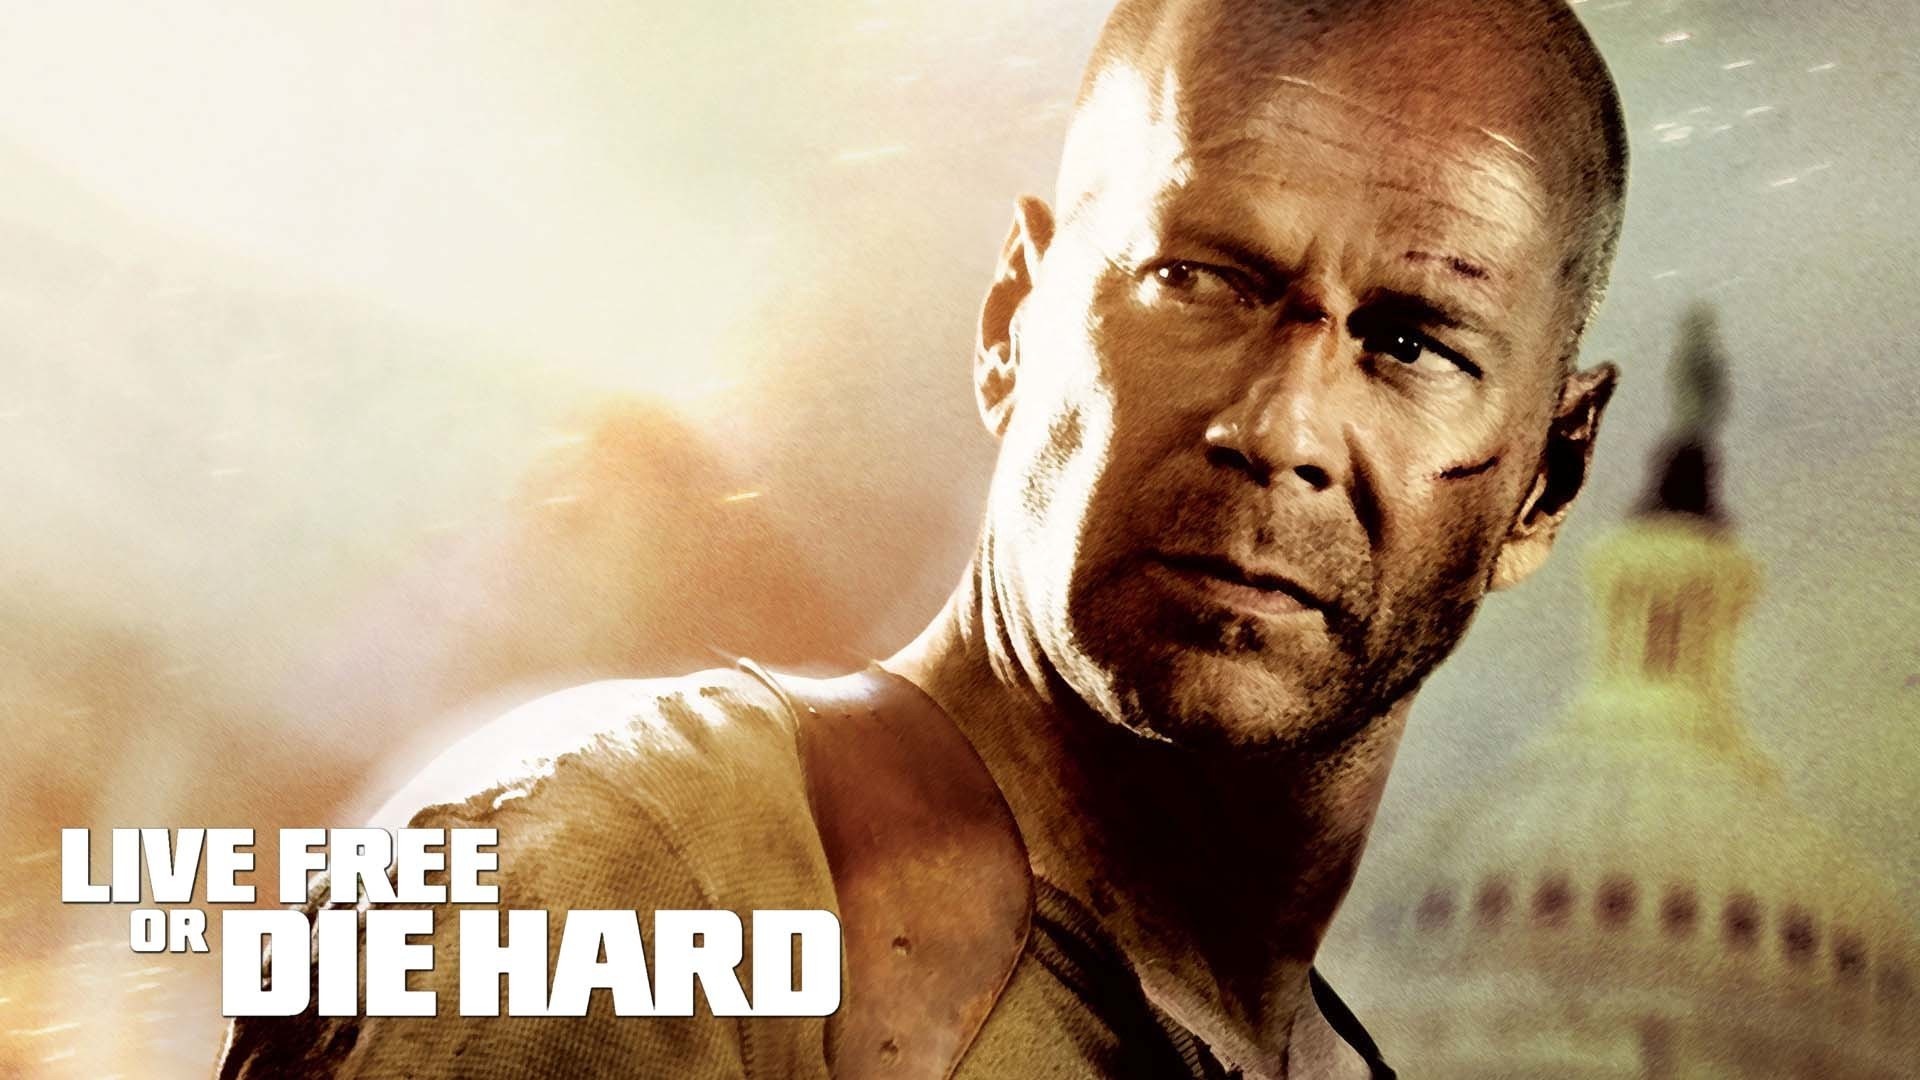 Live Free or Die Hard, Dynamic wallpapers collection, Heart-pounding action, Explosive moments, 1920x1080 Full HD Desktop